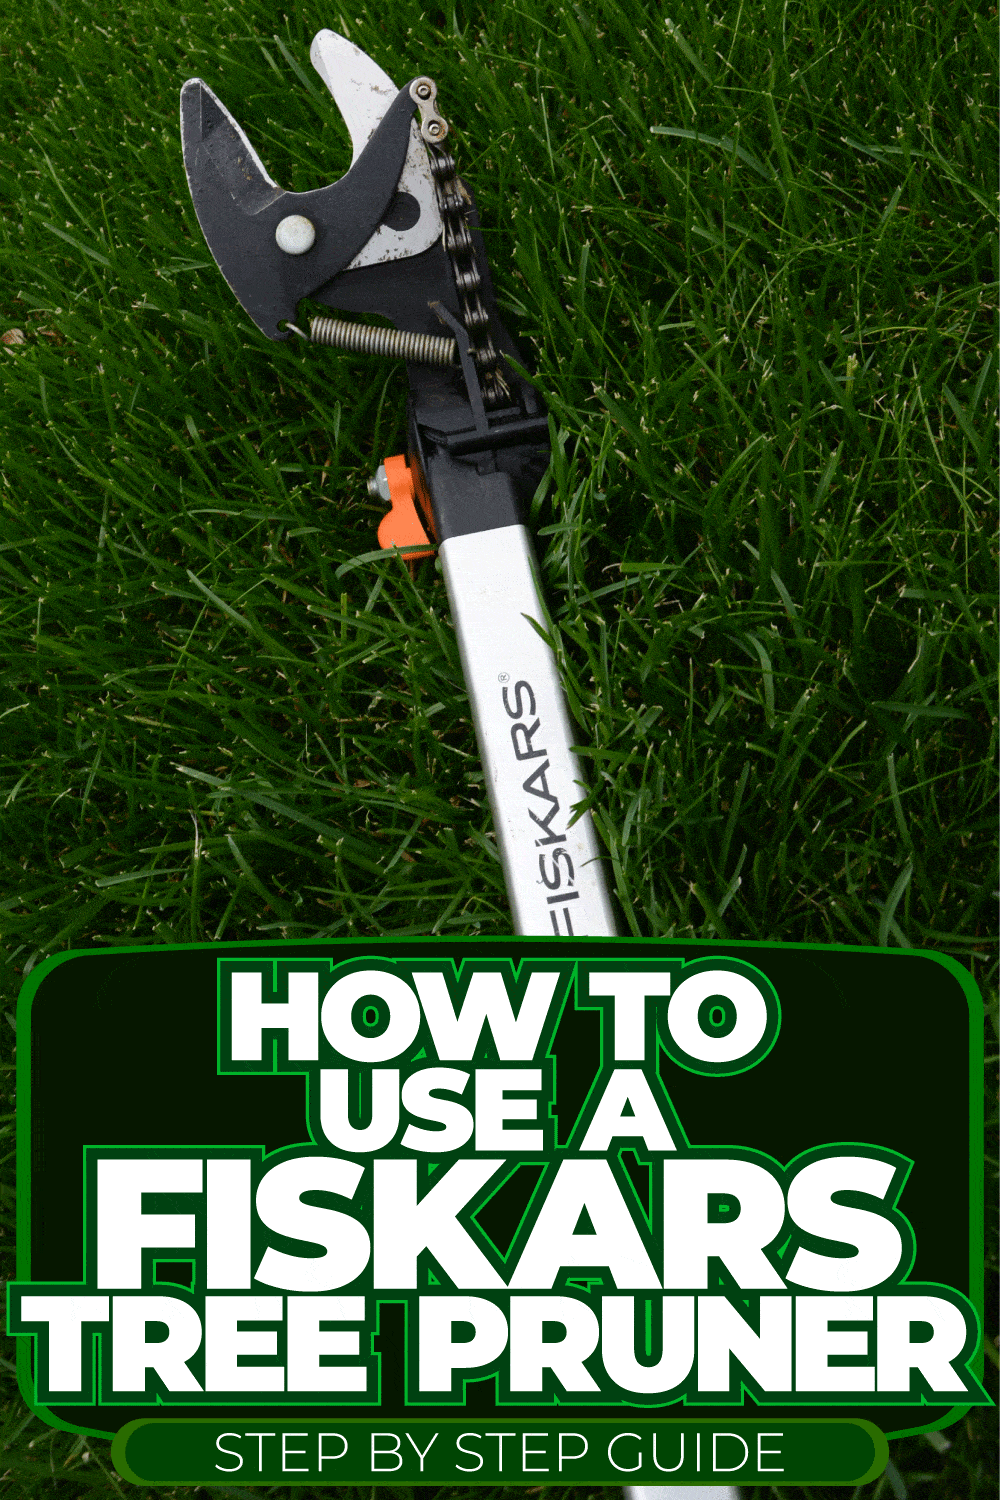 How To Use A Fiskars Tree Pruner [Step By Step Guide]